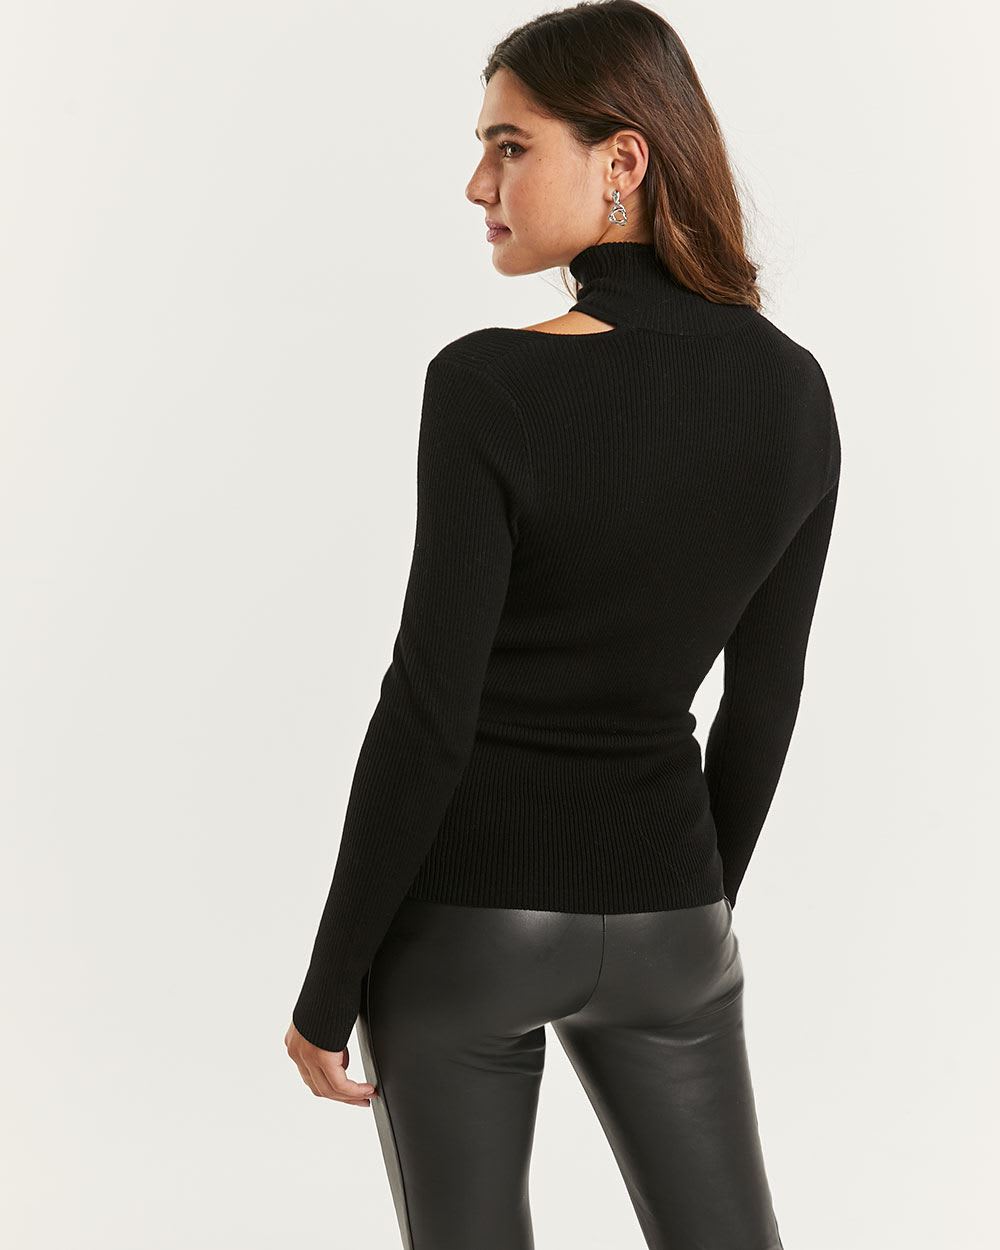 Cutout Knit Turtleneck Pullover